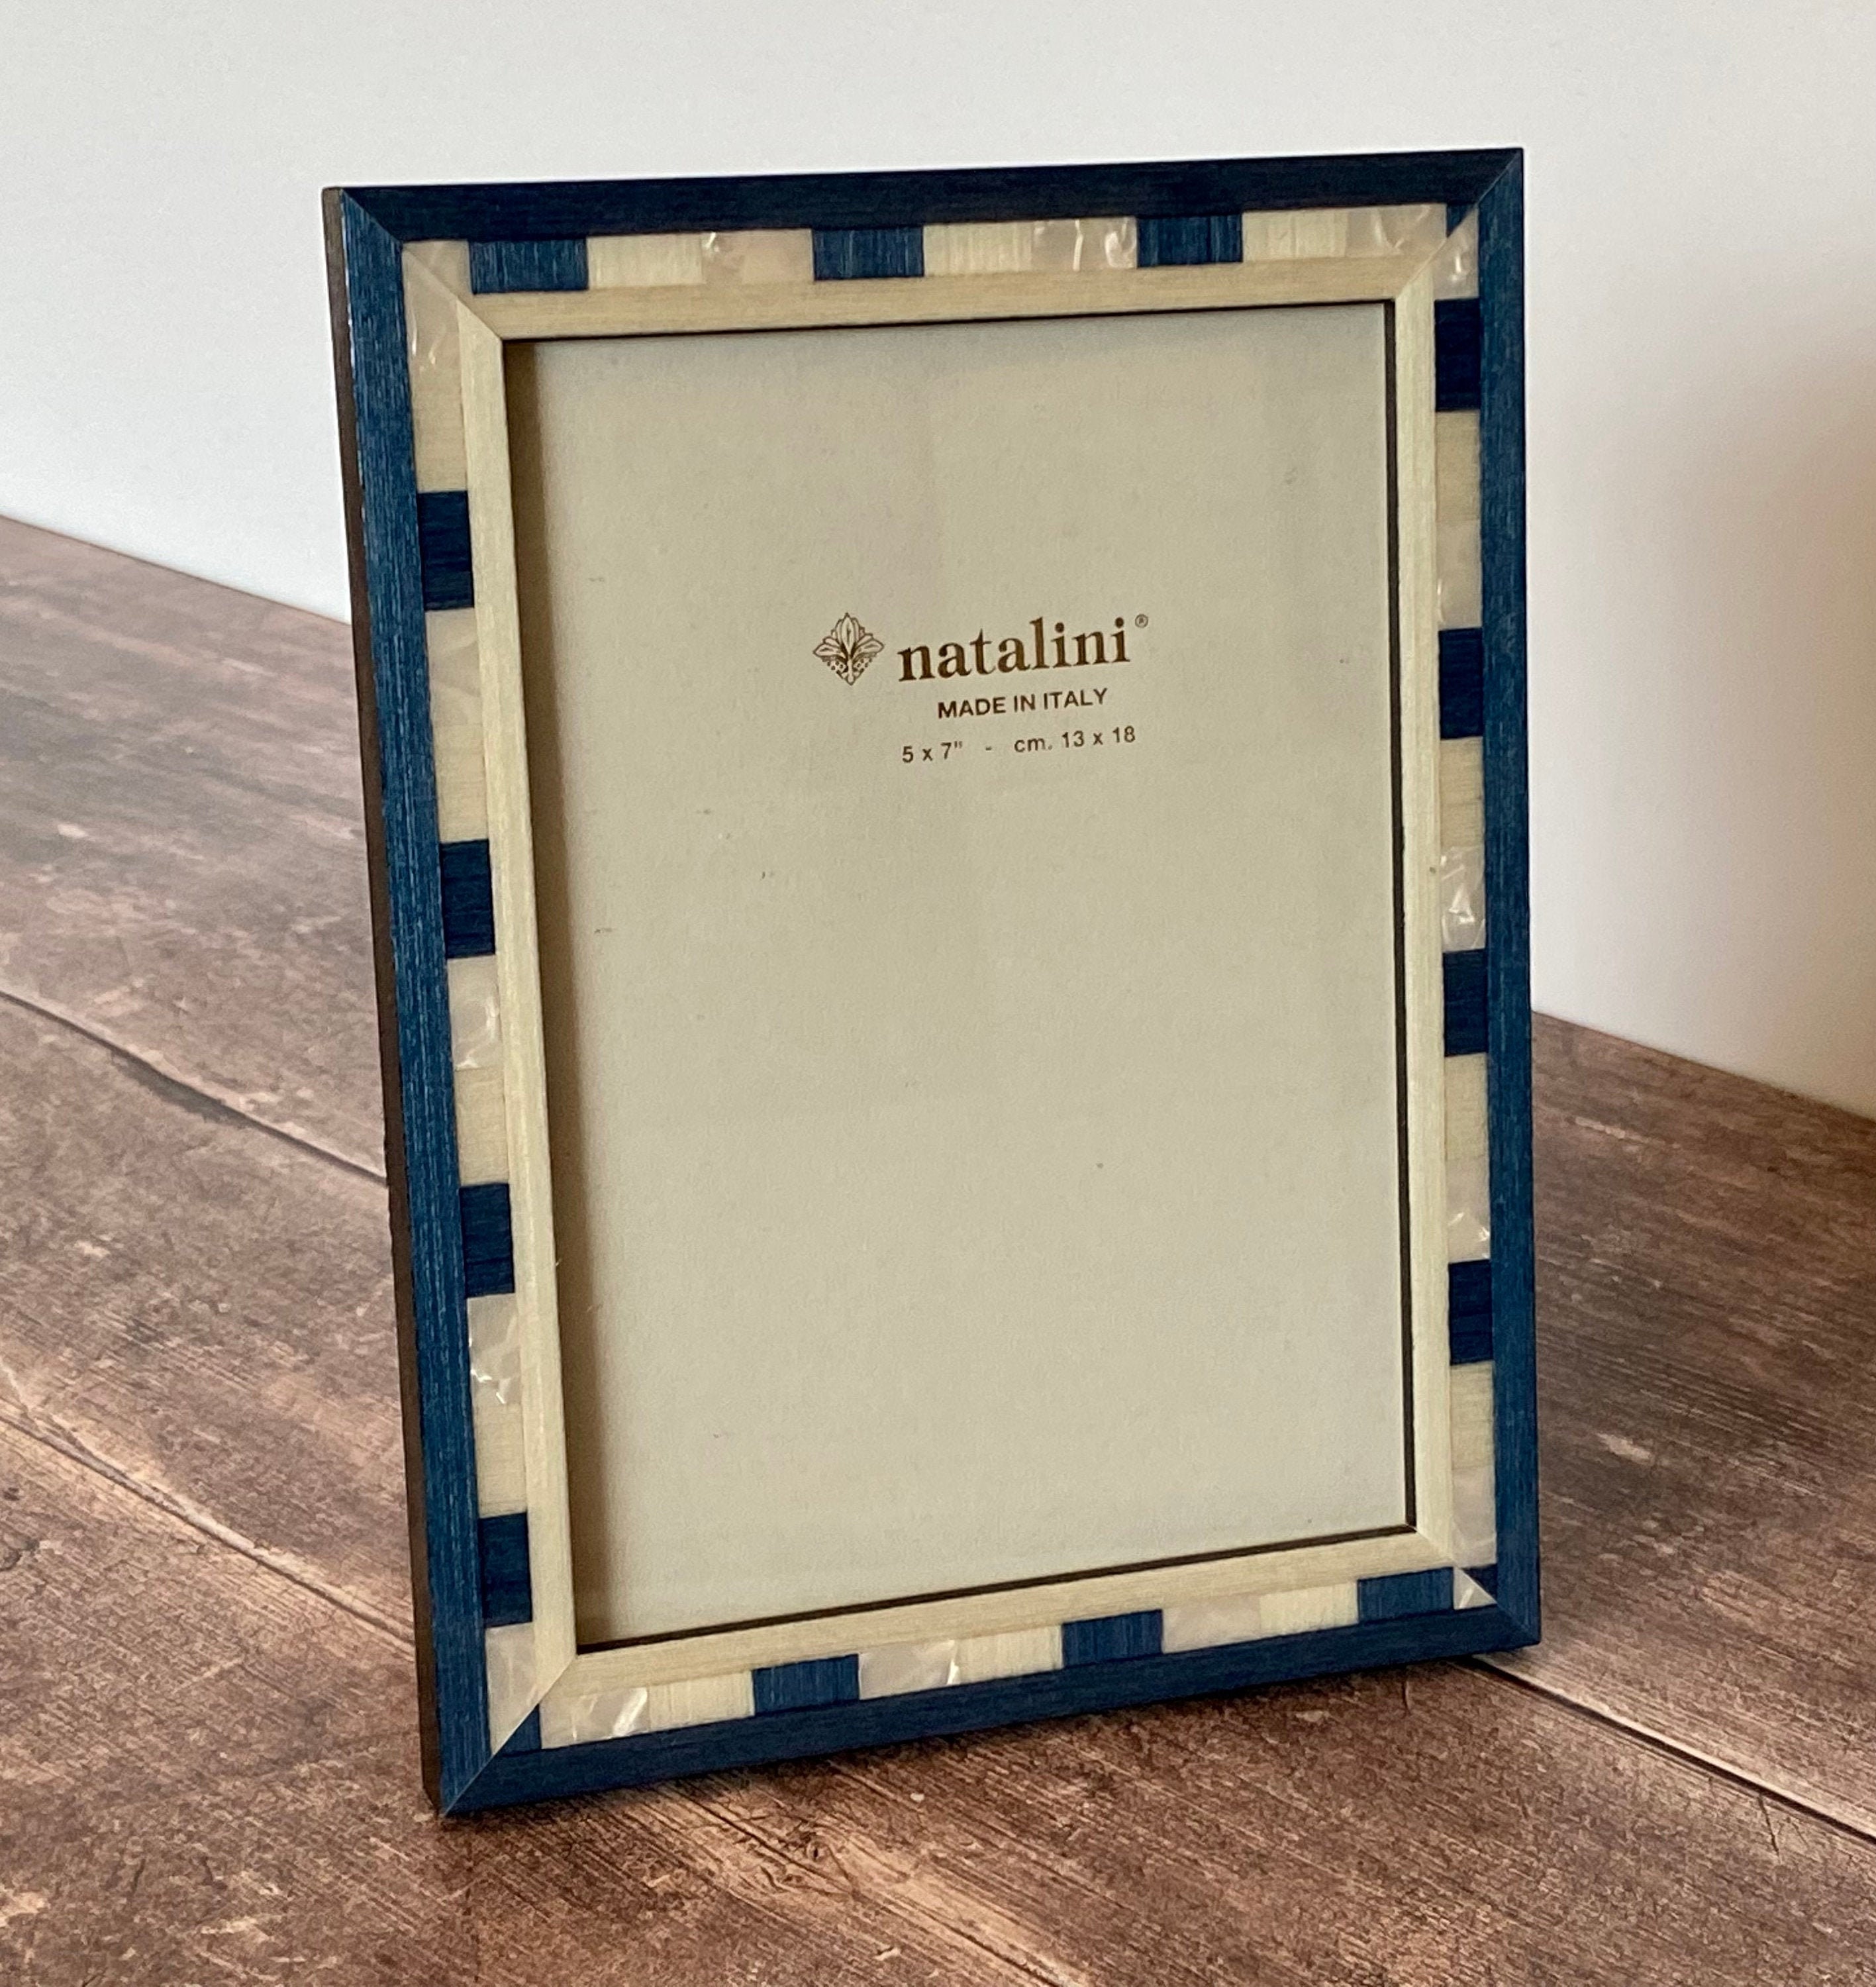 Natalini KT-30 Azzurro Photo Frame Blue and White Wood Marquetry Italy 4x6 New!! 